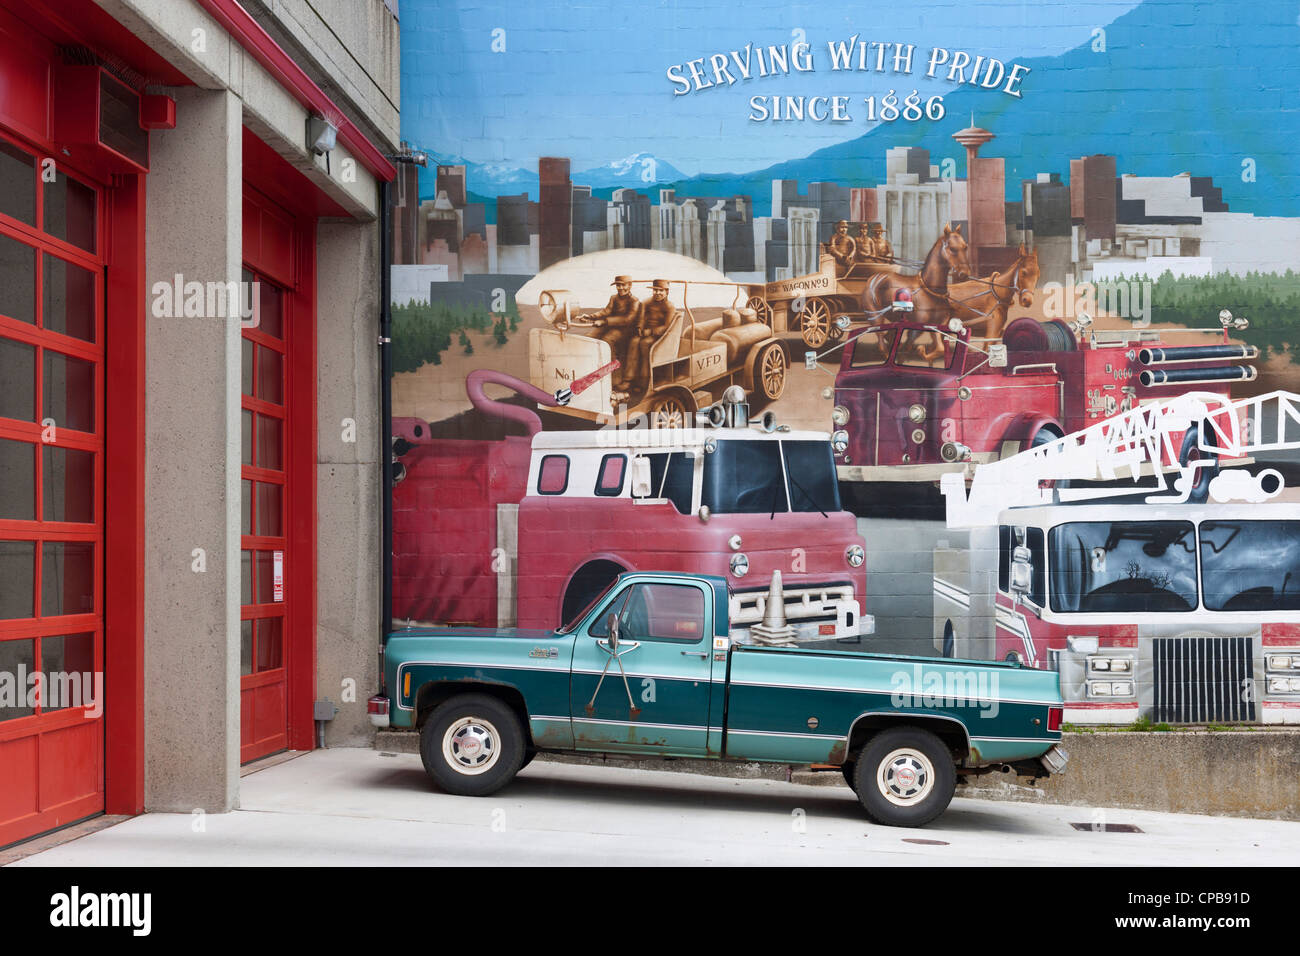 Old Pickup truck & Fire Hall Mural, Vancouver Stock Photo